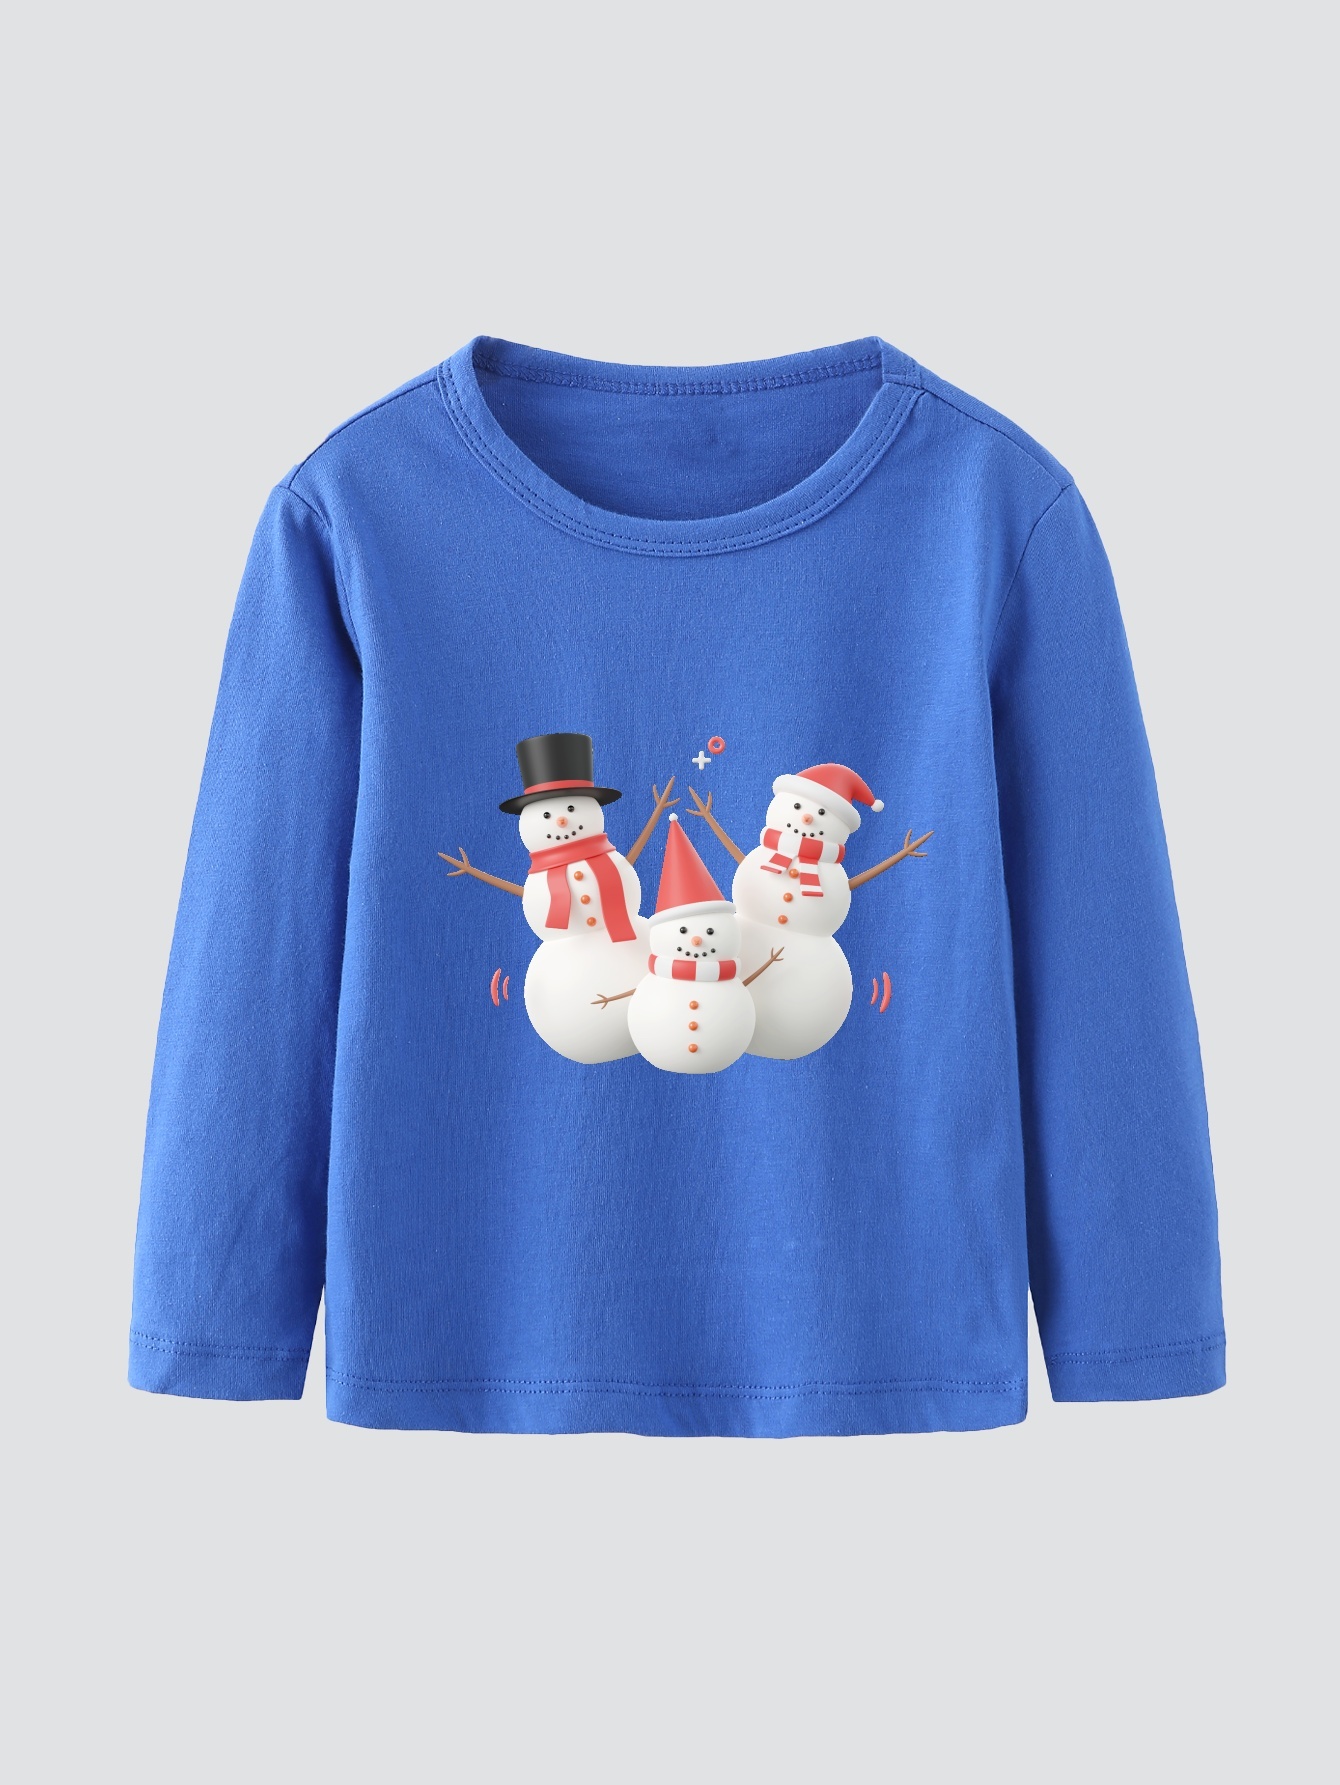 Snowman Long Sleeve T-Shirt in White - Small